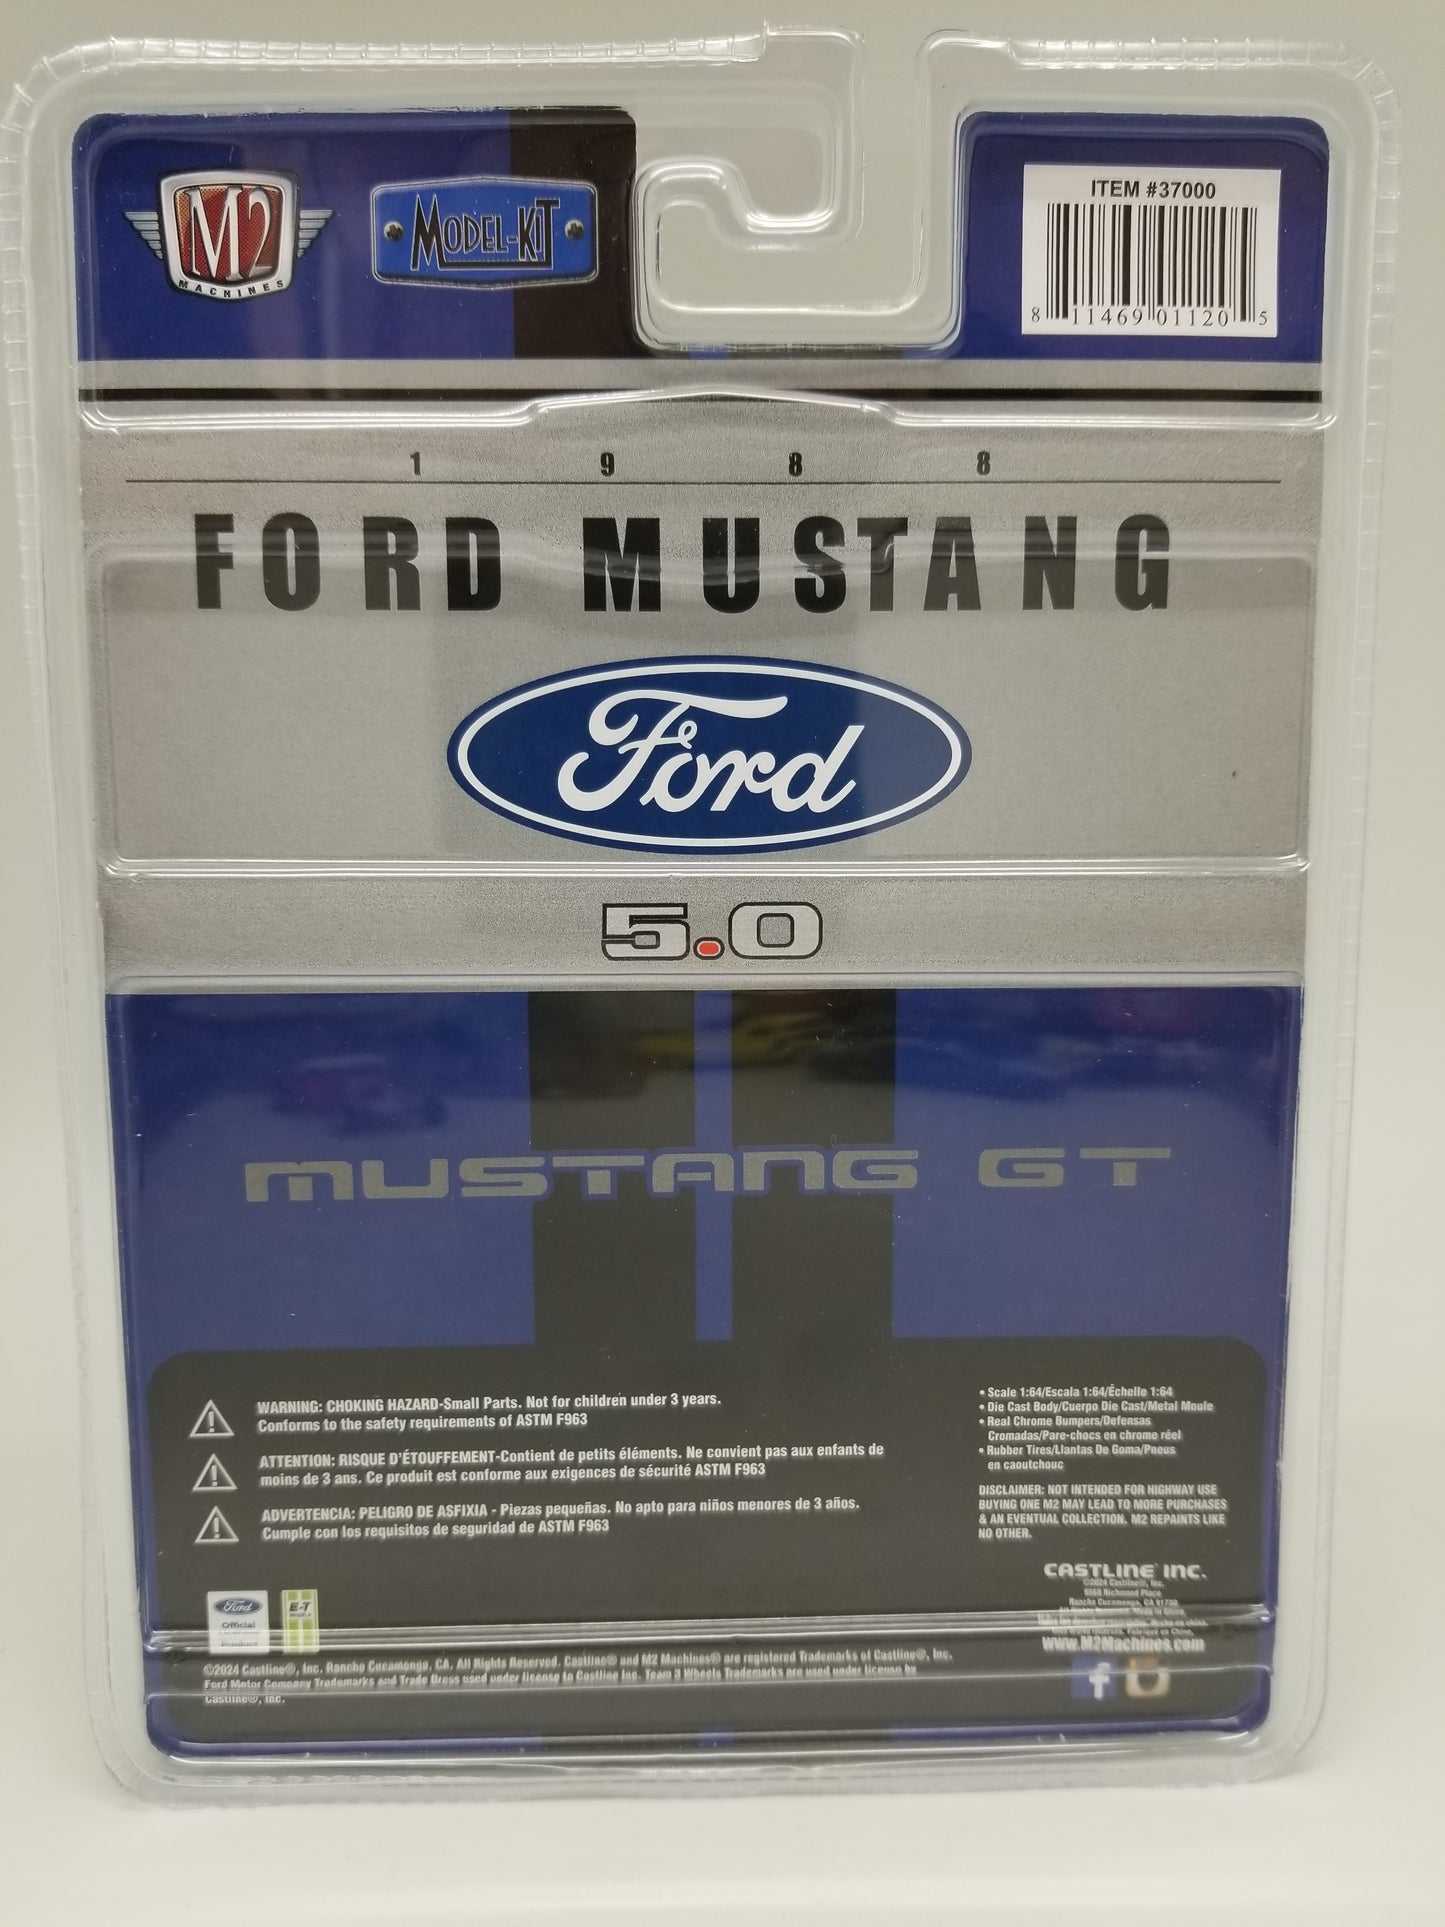 M2 1988 Ford Mustang GT - KIT